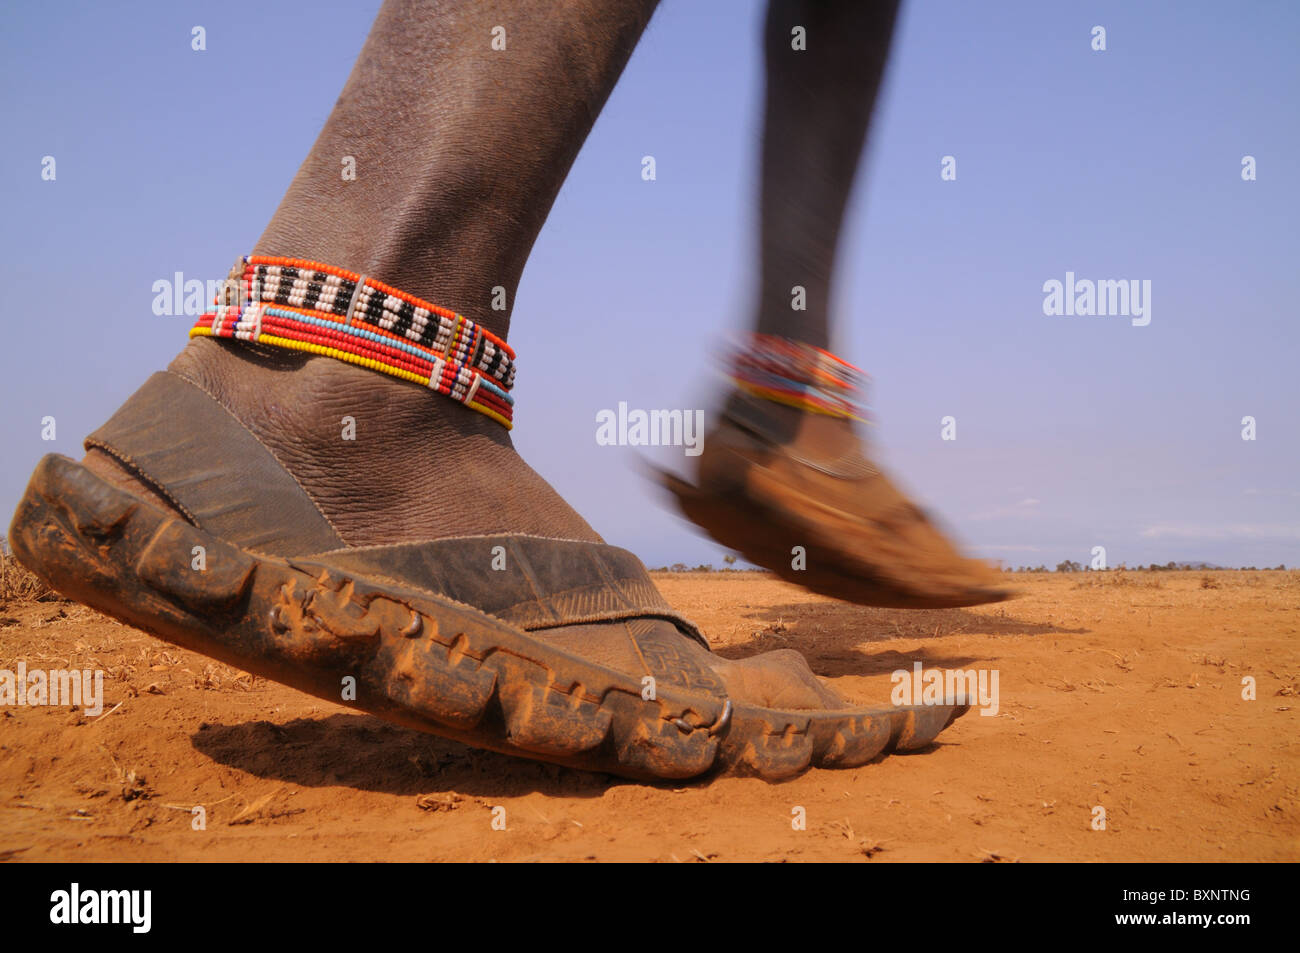 A Maasai warrior walks across the dusty and arid landscape wearing his rubber shoes, uniquely made out of old tyres. Stock Photo